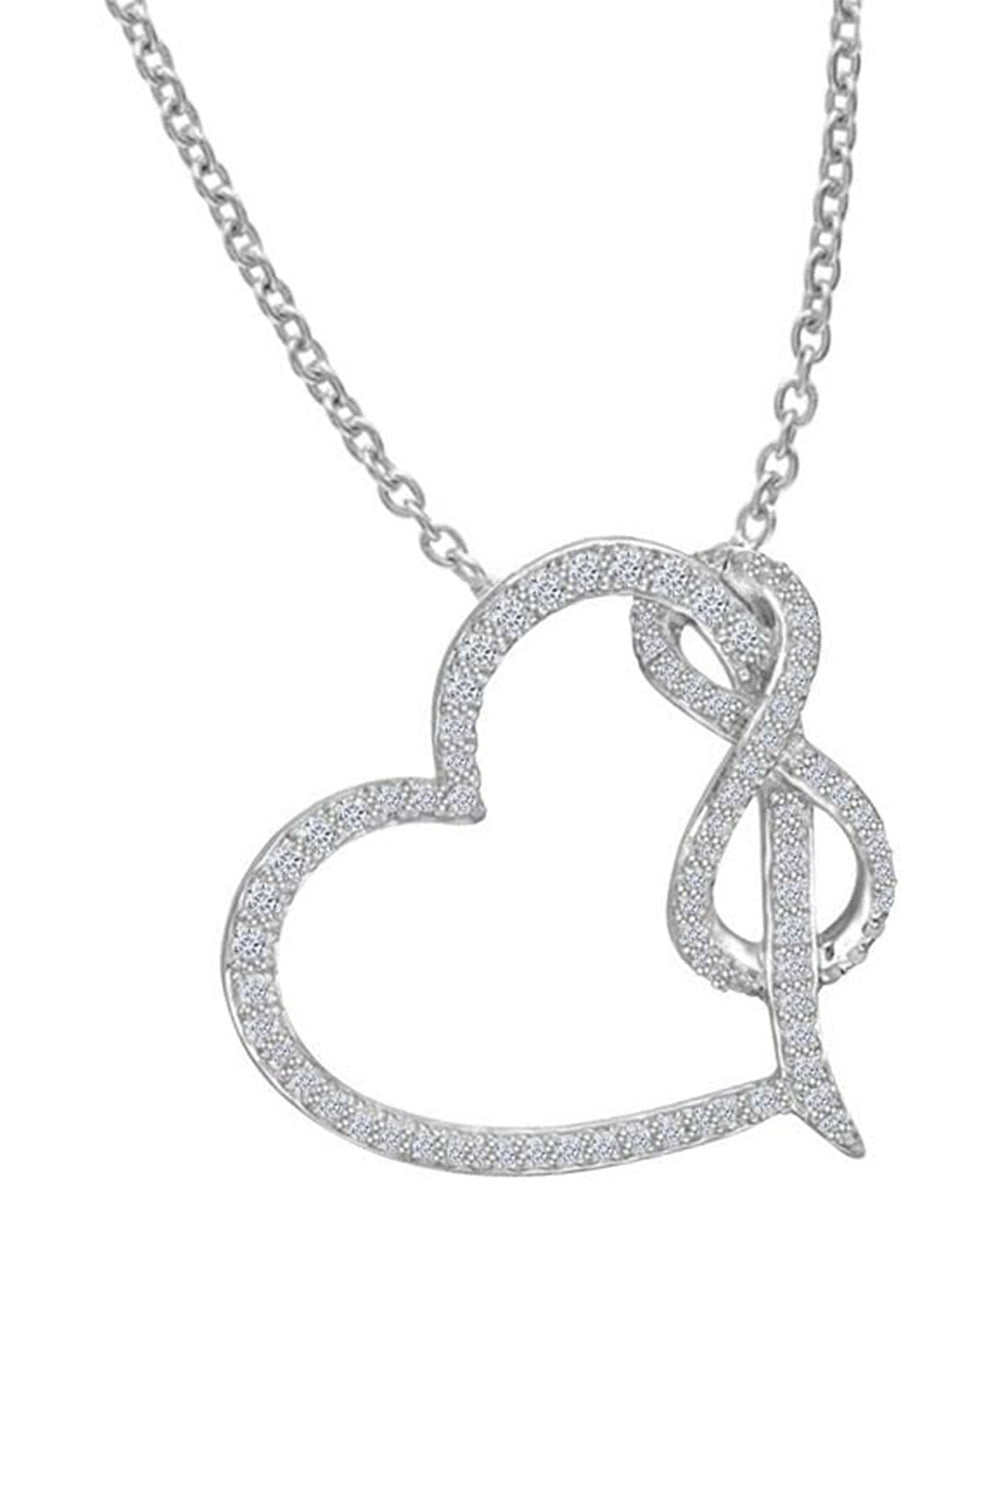 White Gold Color Love Heart Infinity Pendant Necklace